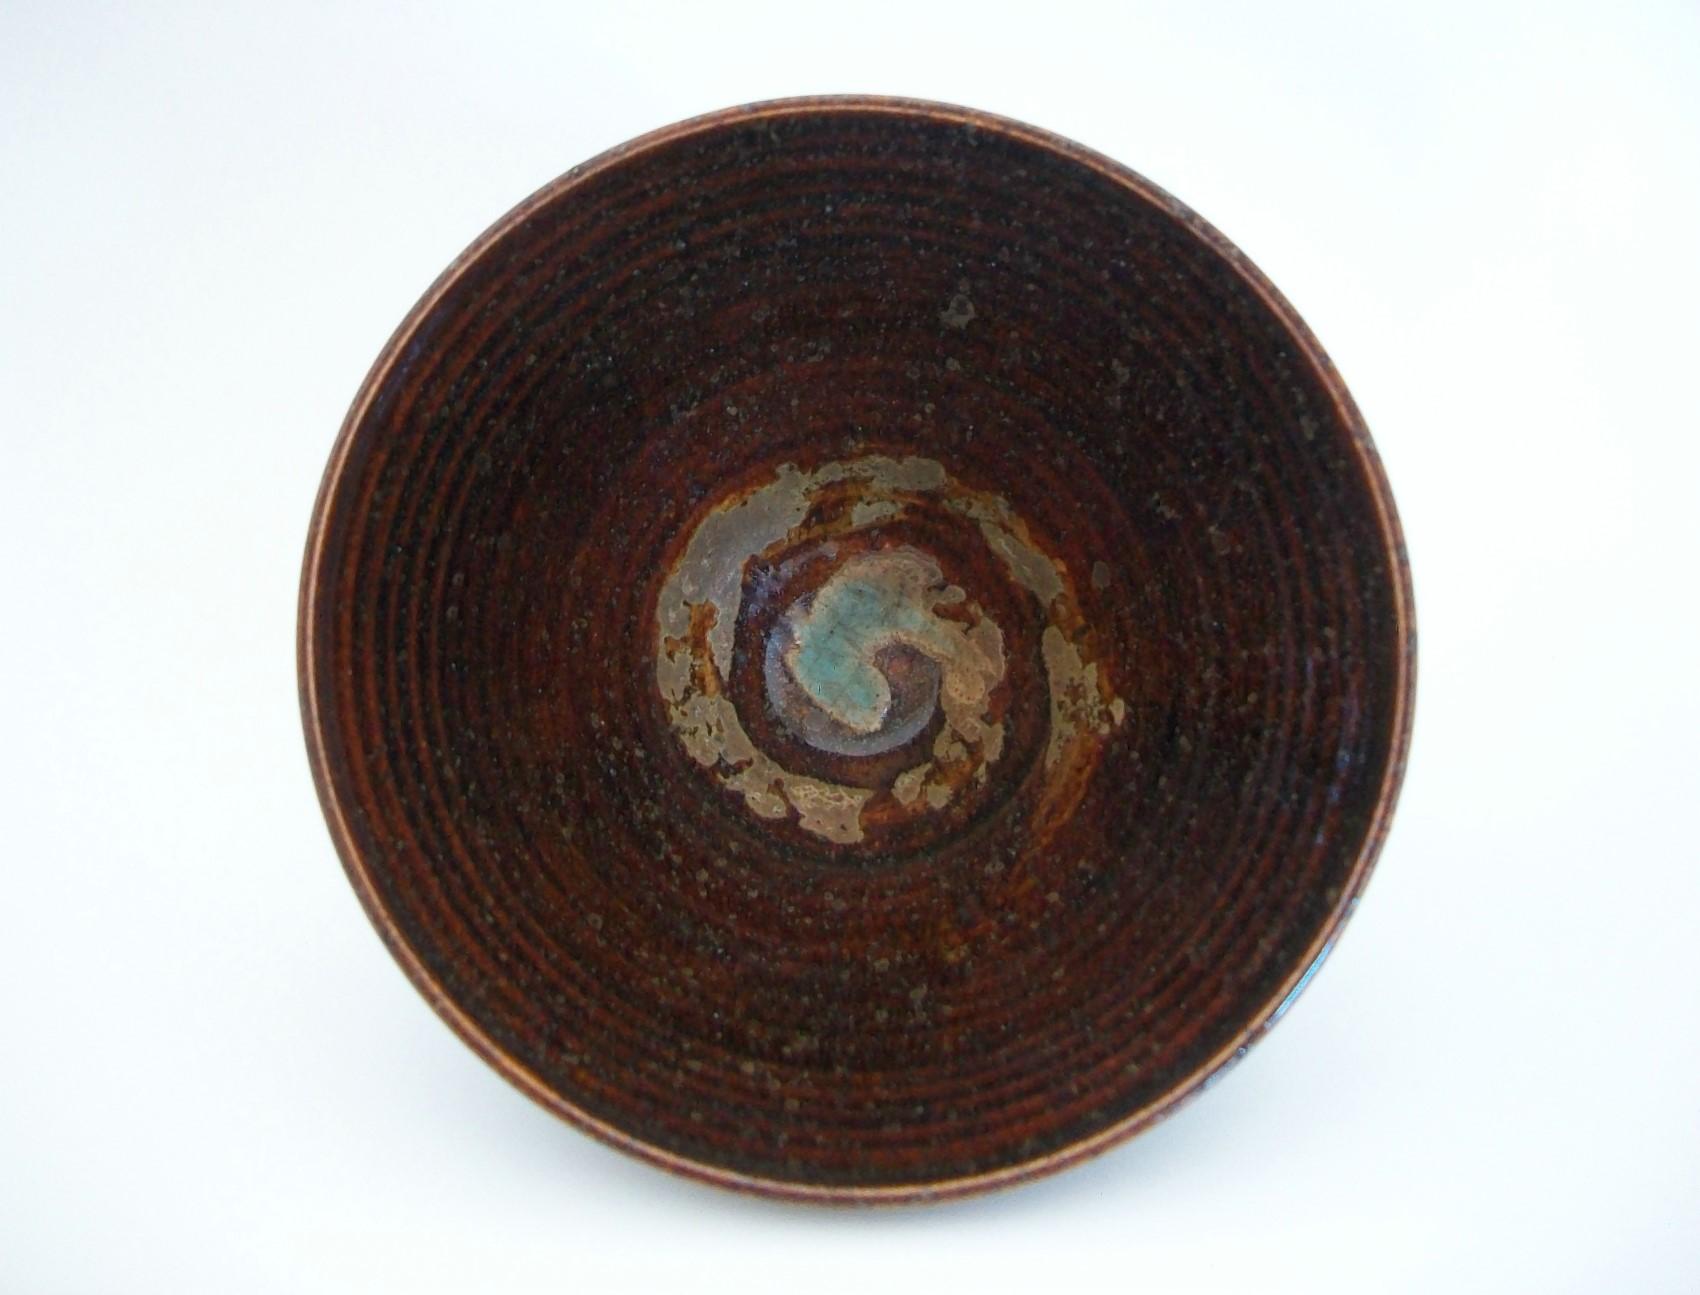 Superb Studio Pottery conical bowl - wheel thrown featuring a hand painted swirl pattern to the inside of the bowl in tan and turquoise - sand infused gloss brown glaze over-all - indistinctly signed and dated on the base - Canada - circa